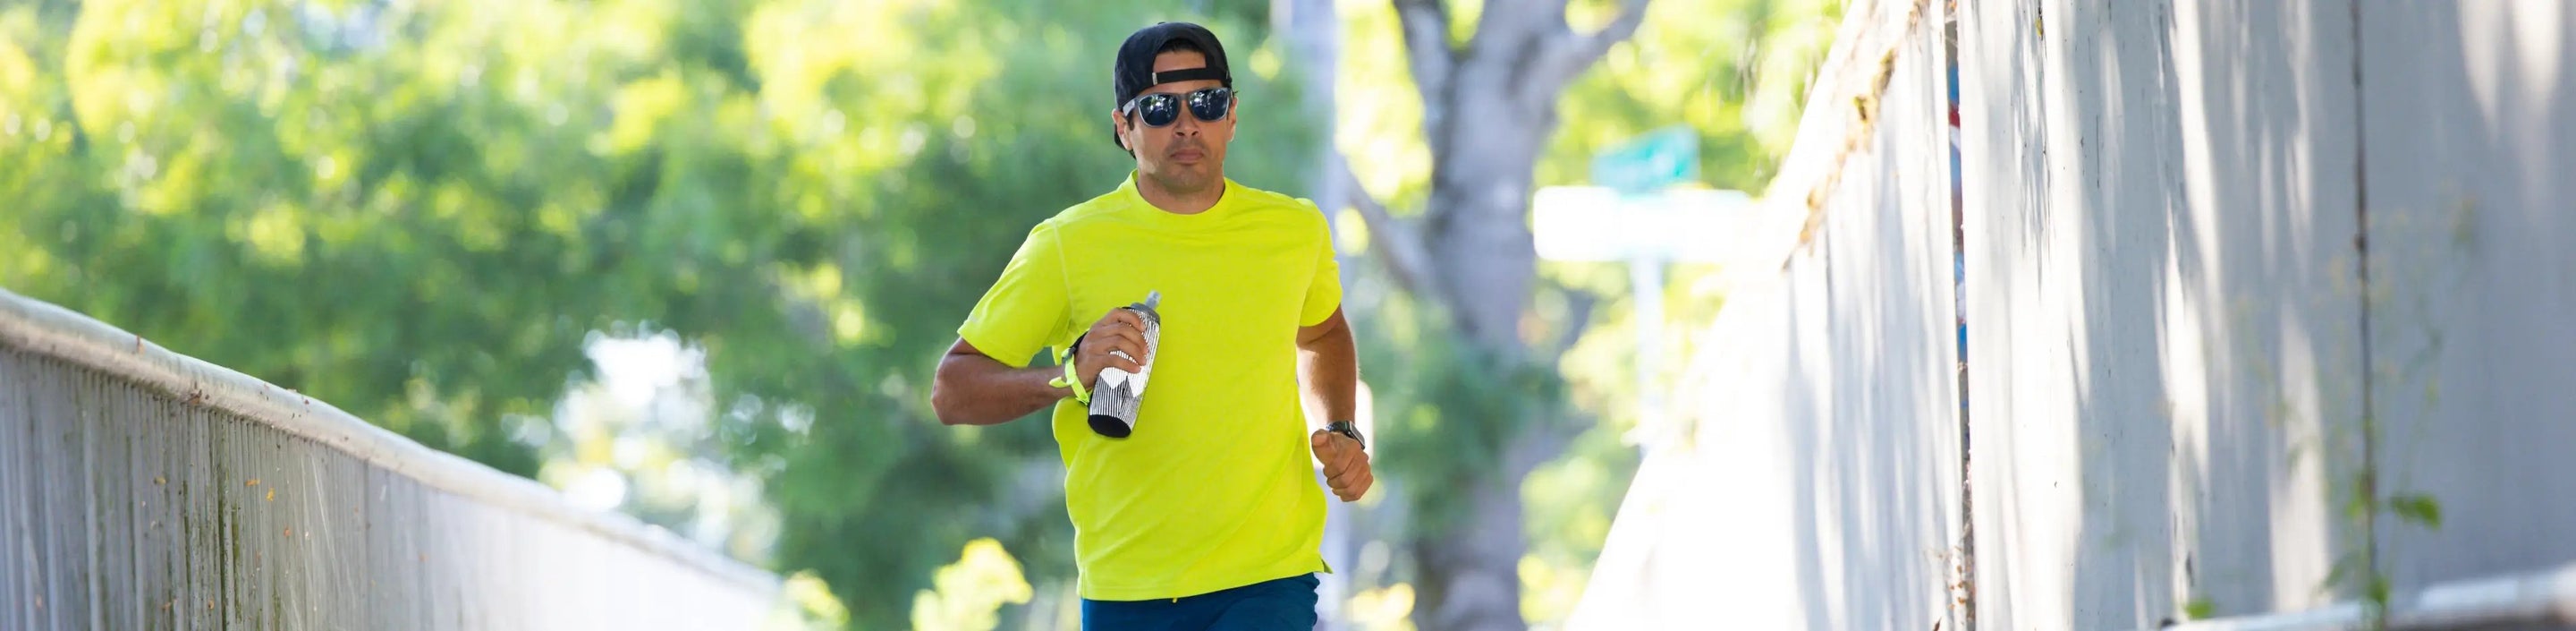 male runner wearing Nathan Sports Short Sleeve Shirt in bright yellow holding a handheld water bottle